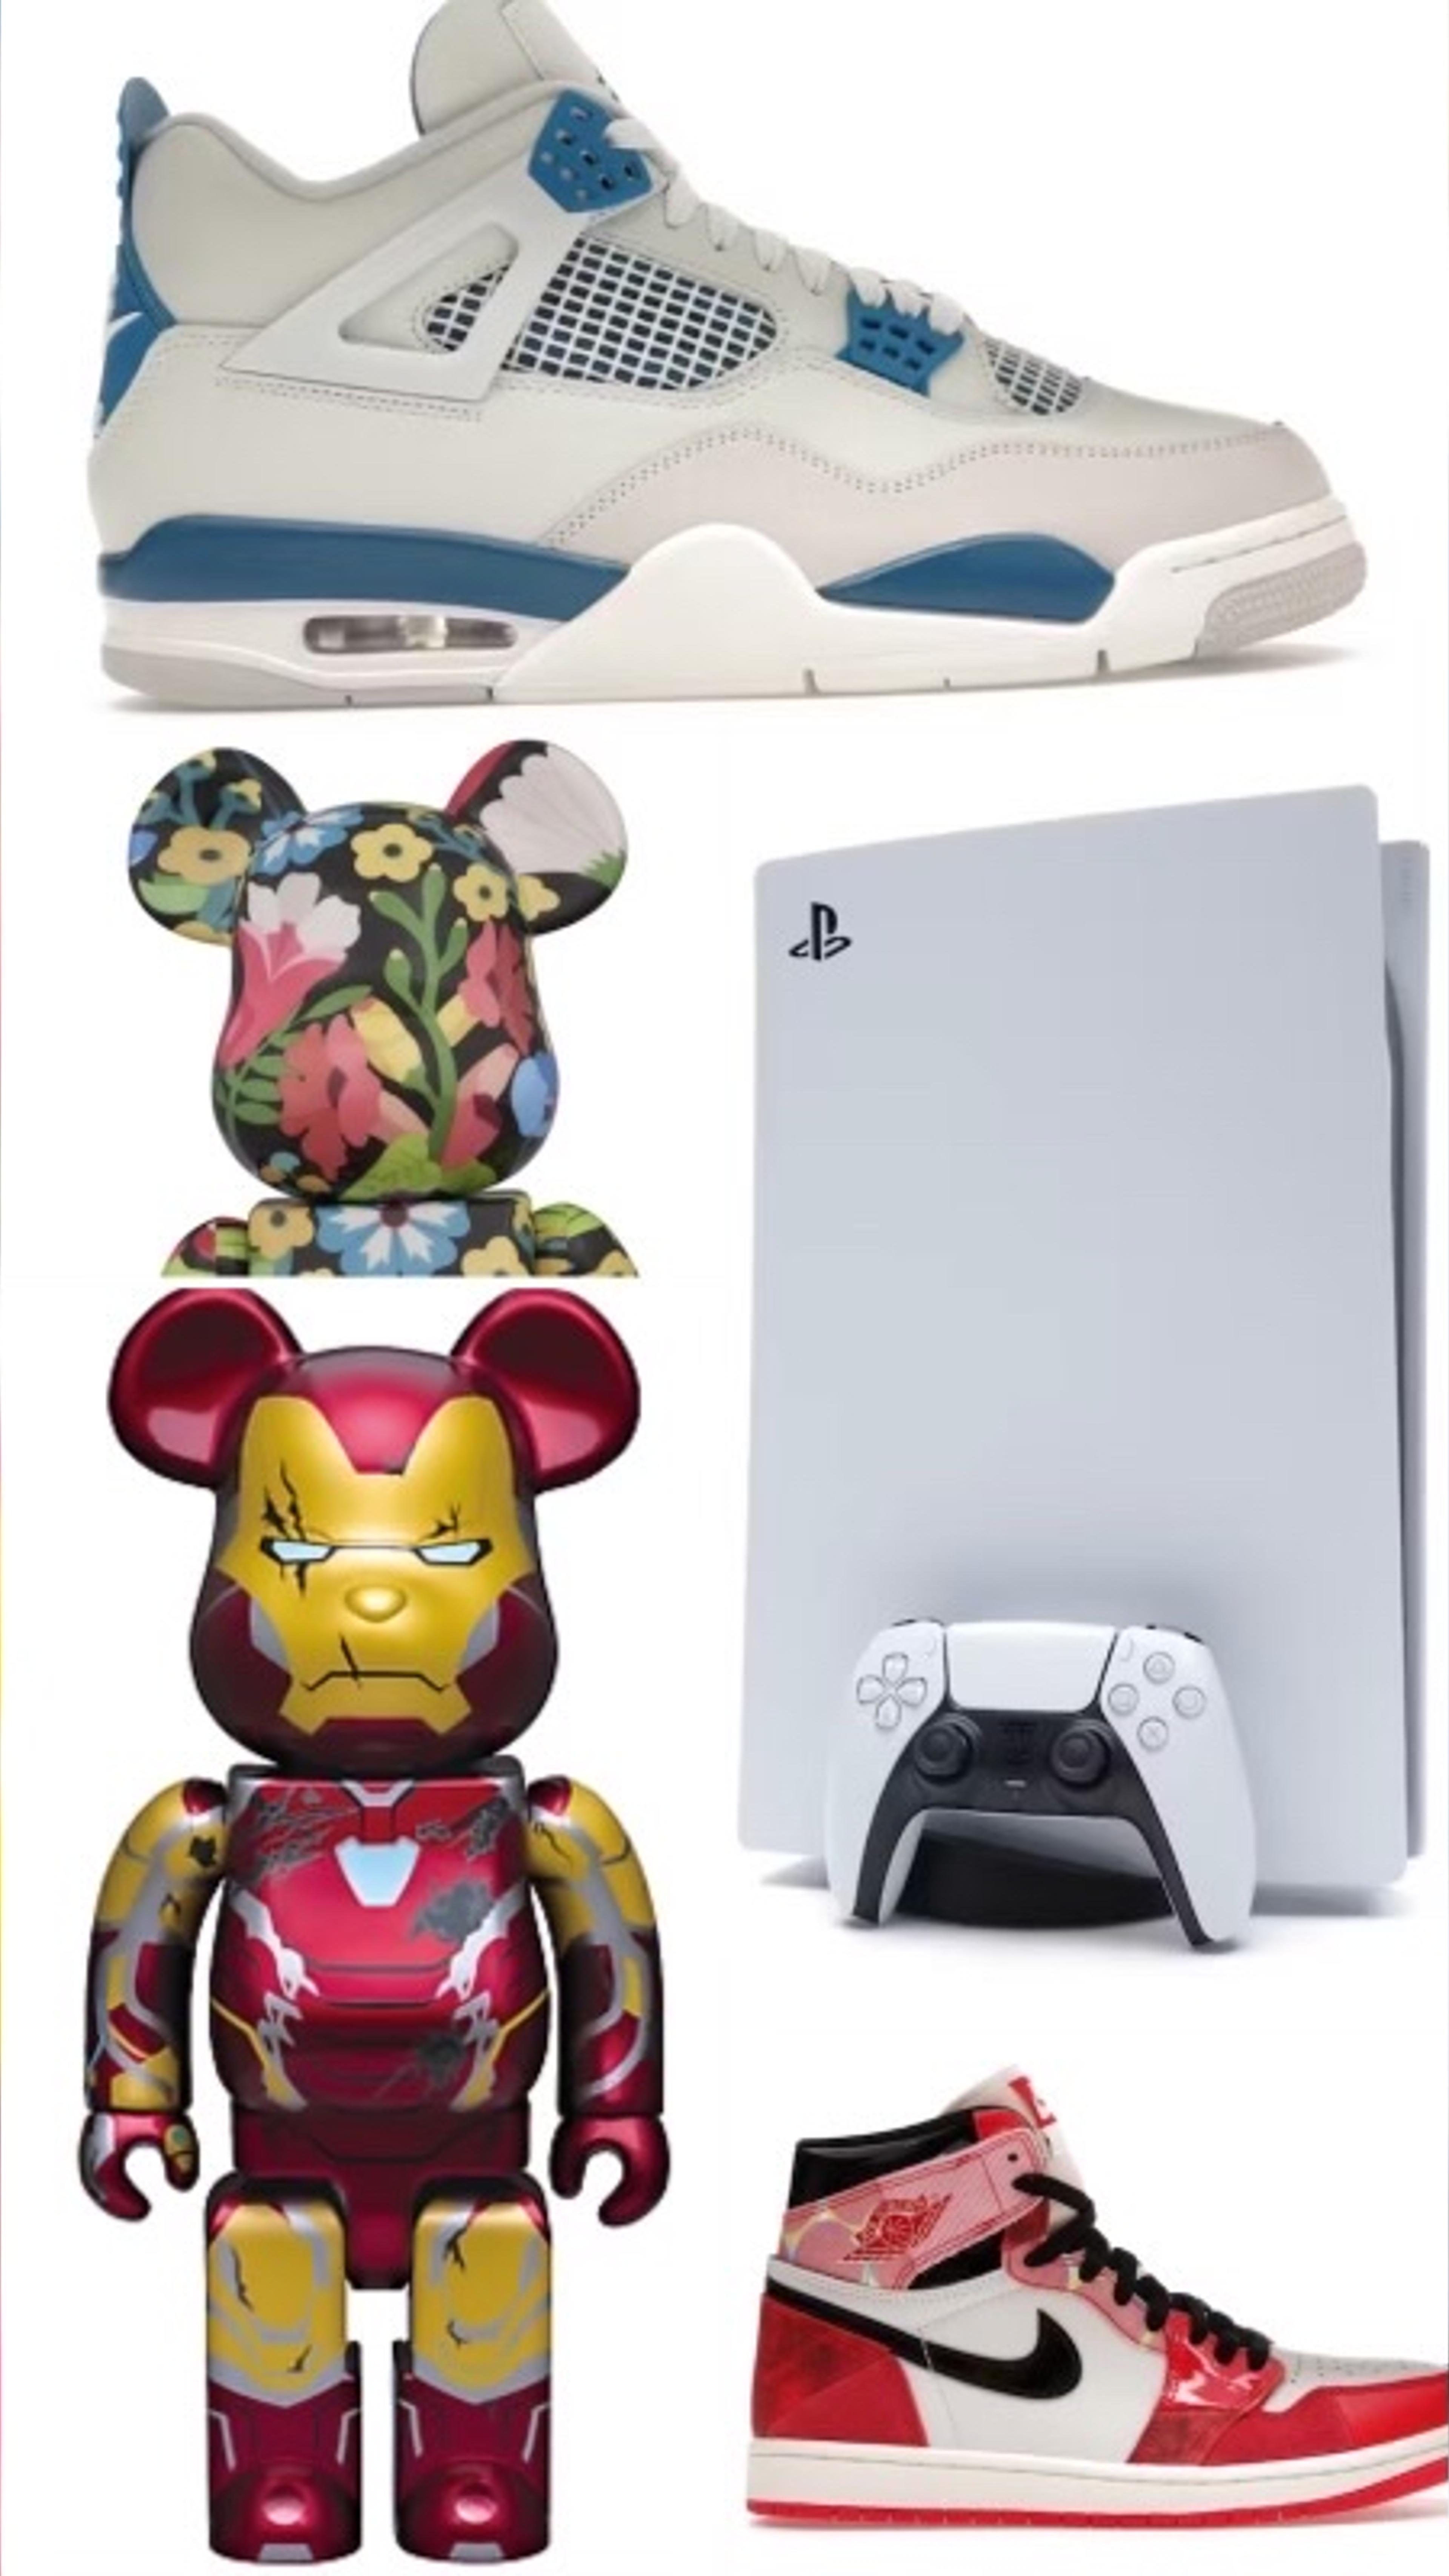 Preview image for the show titled "🔥PS5, Jordan’s, BE@RBRICKS & More!!!🔥" at May 10, 2024